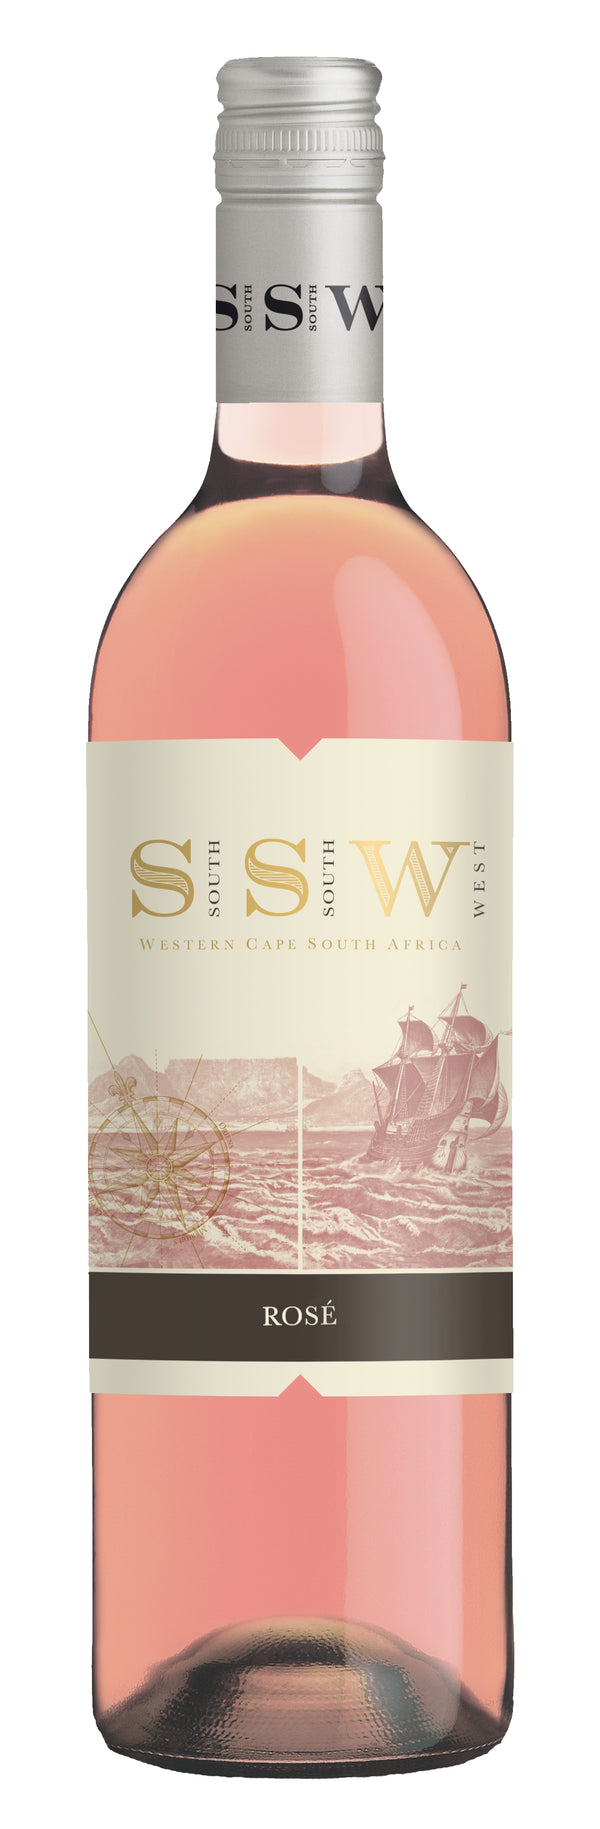 South South West Rose Wine